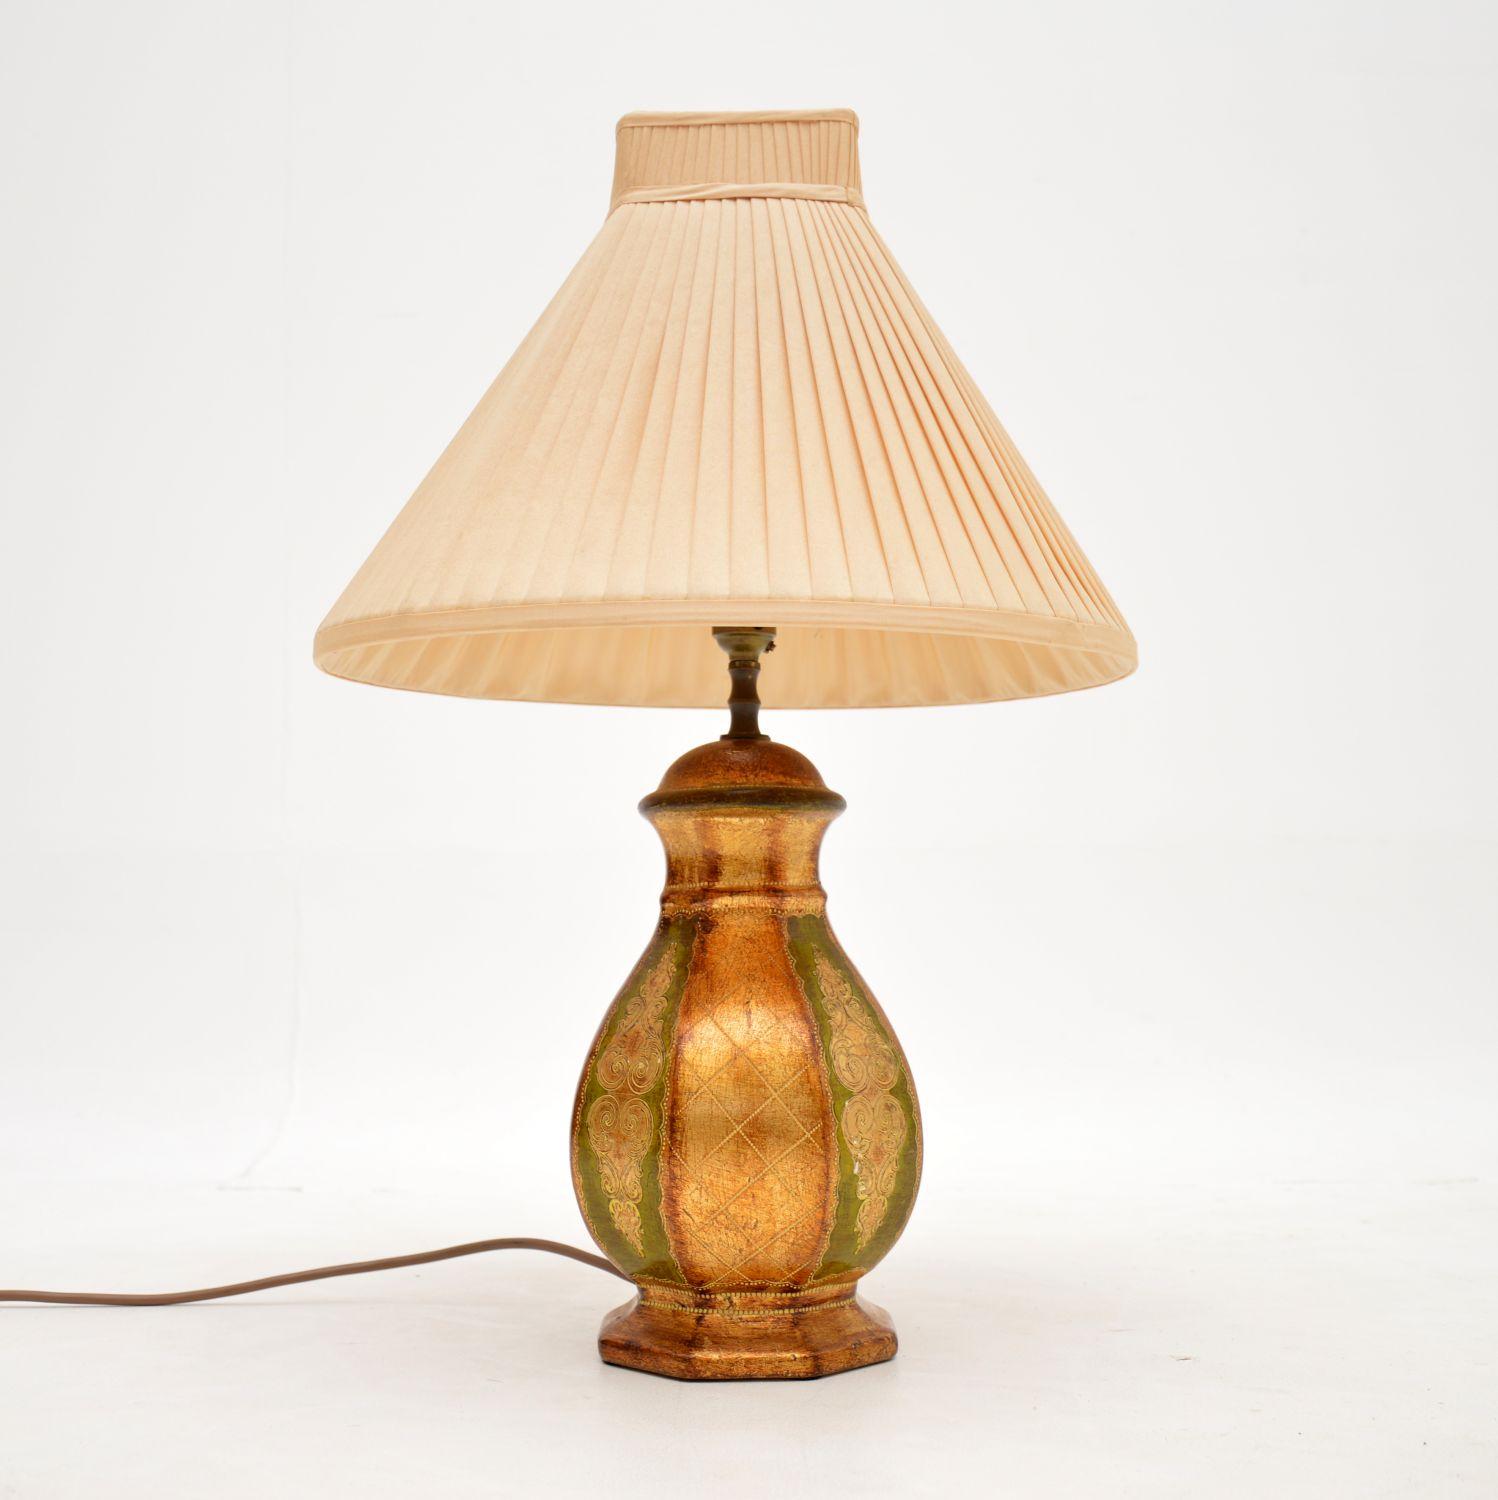 A beautiful vintage Italian ceramic table lamp, very much in the Venetian style. This was made in Italy, it dates from around the 1960’s.

It is of amazing quality, and is beautifully hand painted with gold and green tones.

The condition is